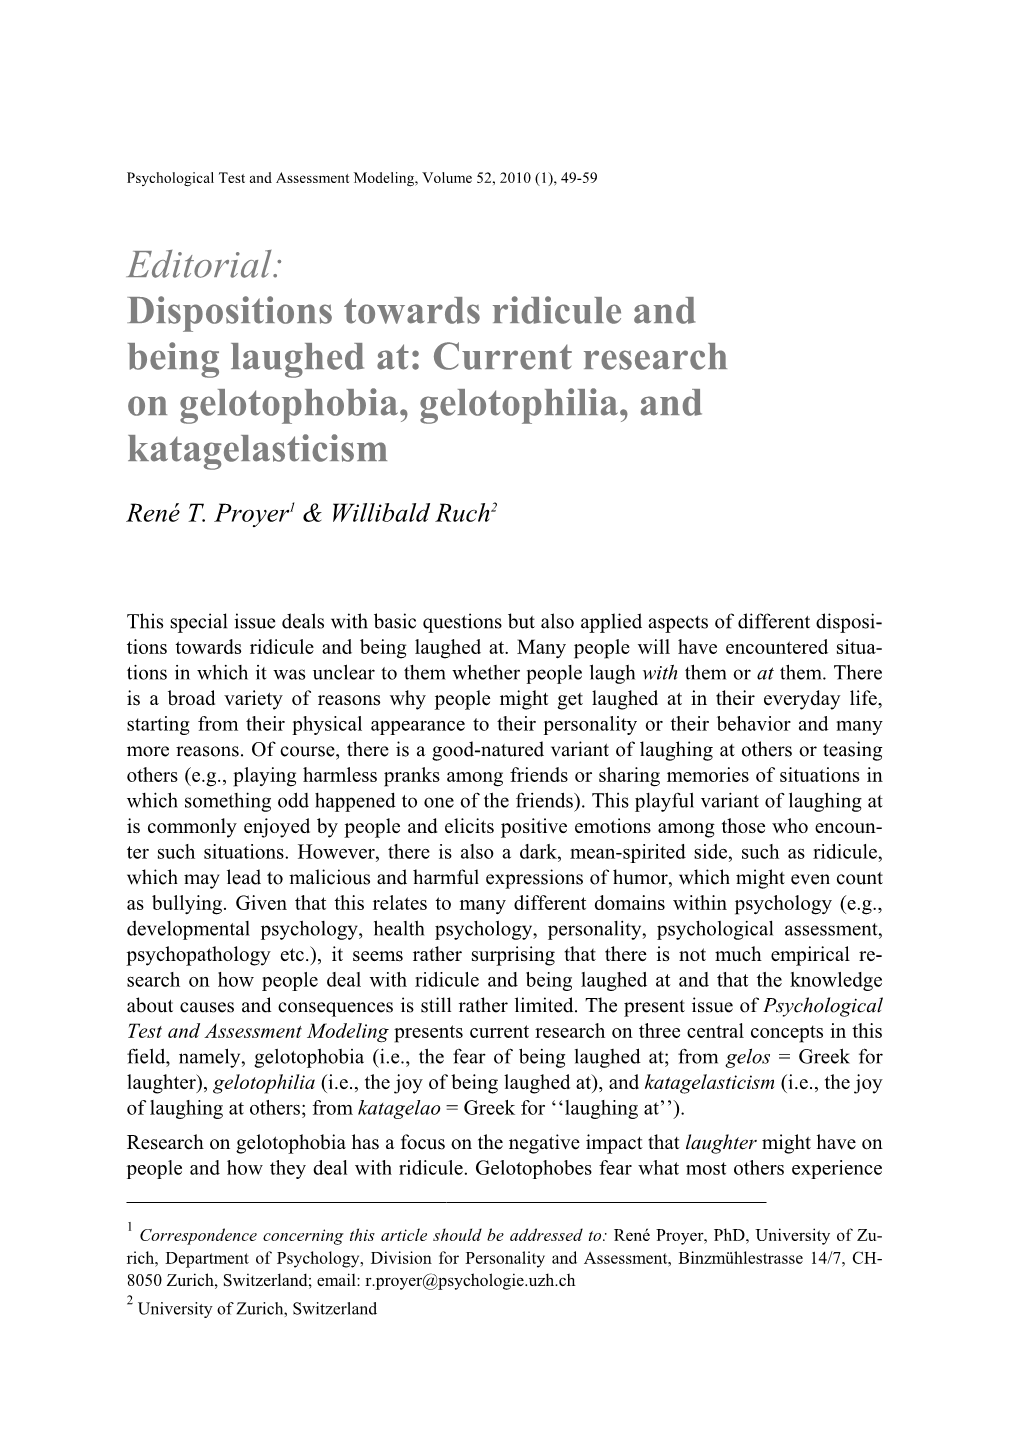 Dispositions Towards Ridicule and Being Laughed At: Current Research on Gelotophobia, Gelotophilia, and Katagelasticism